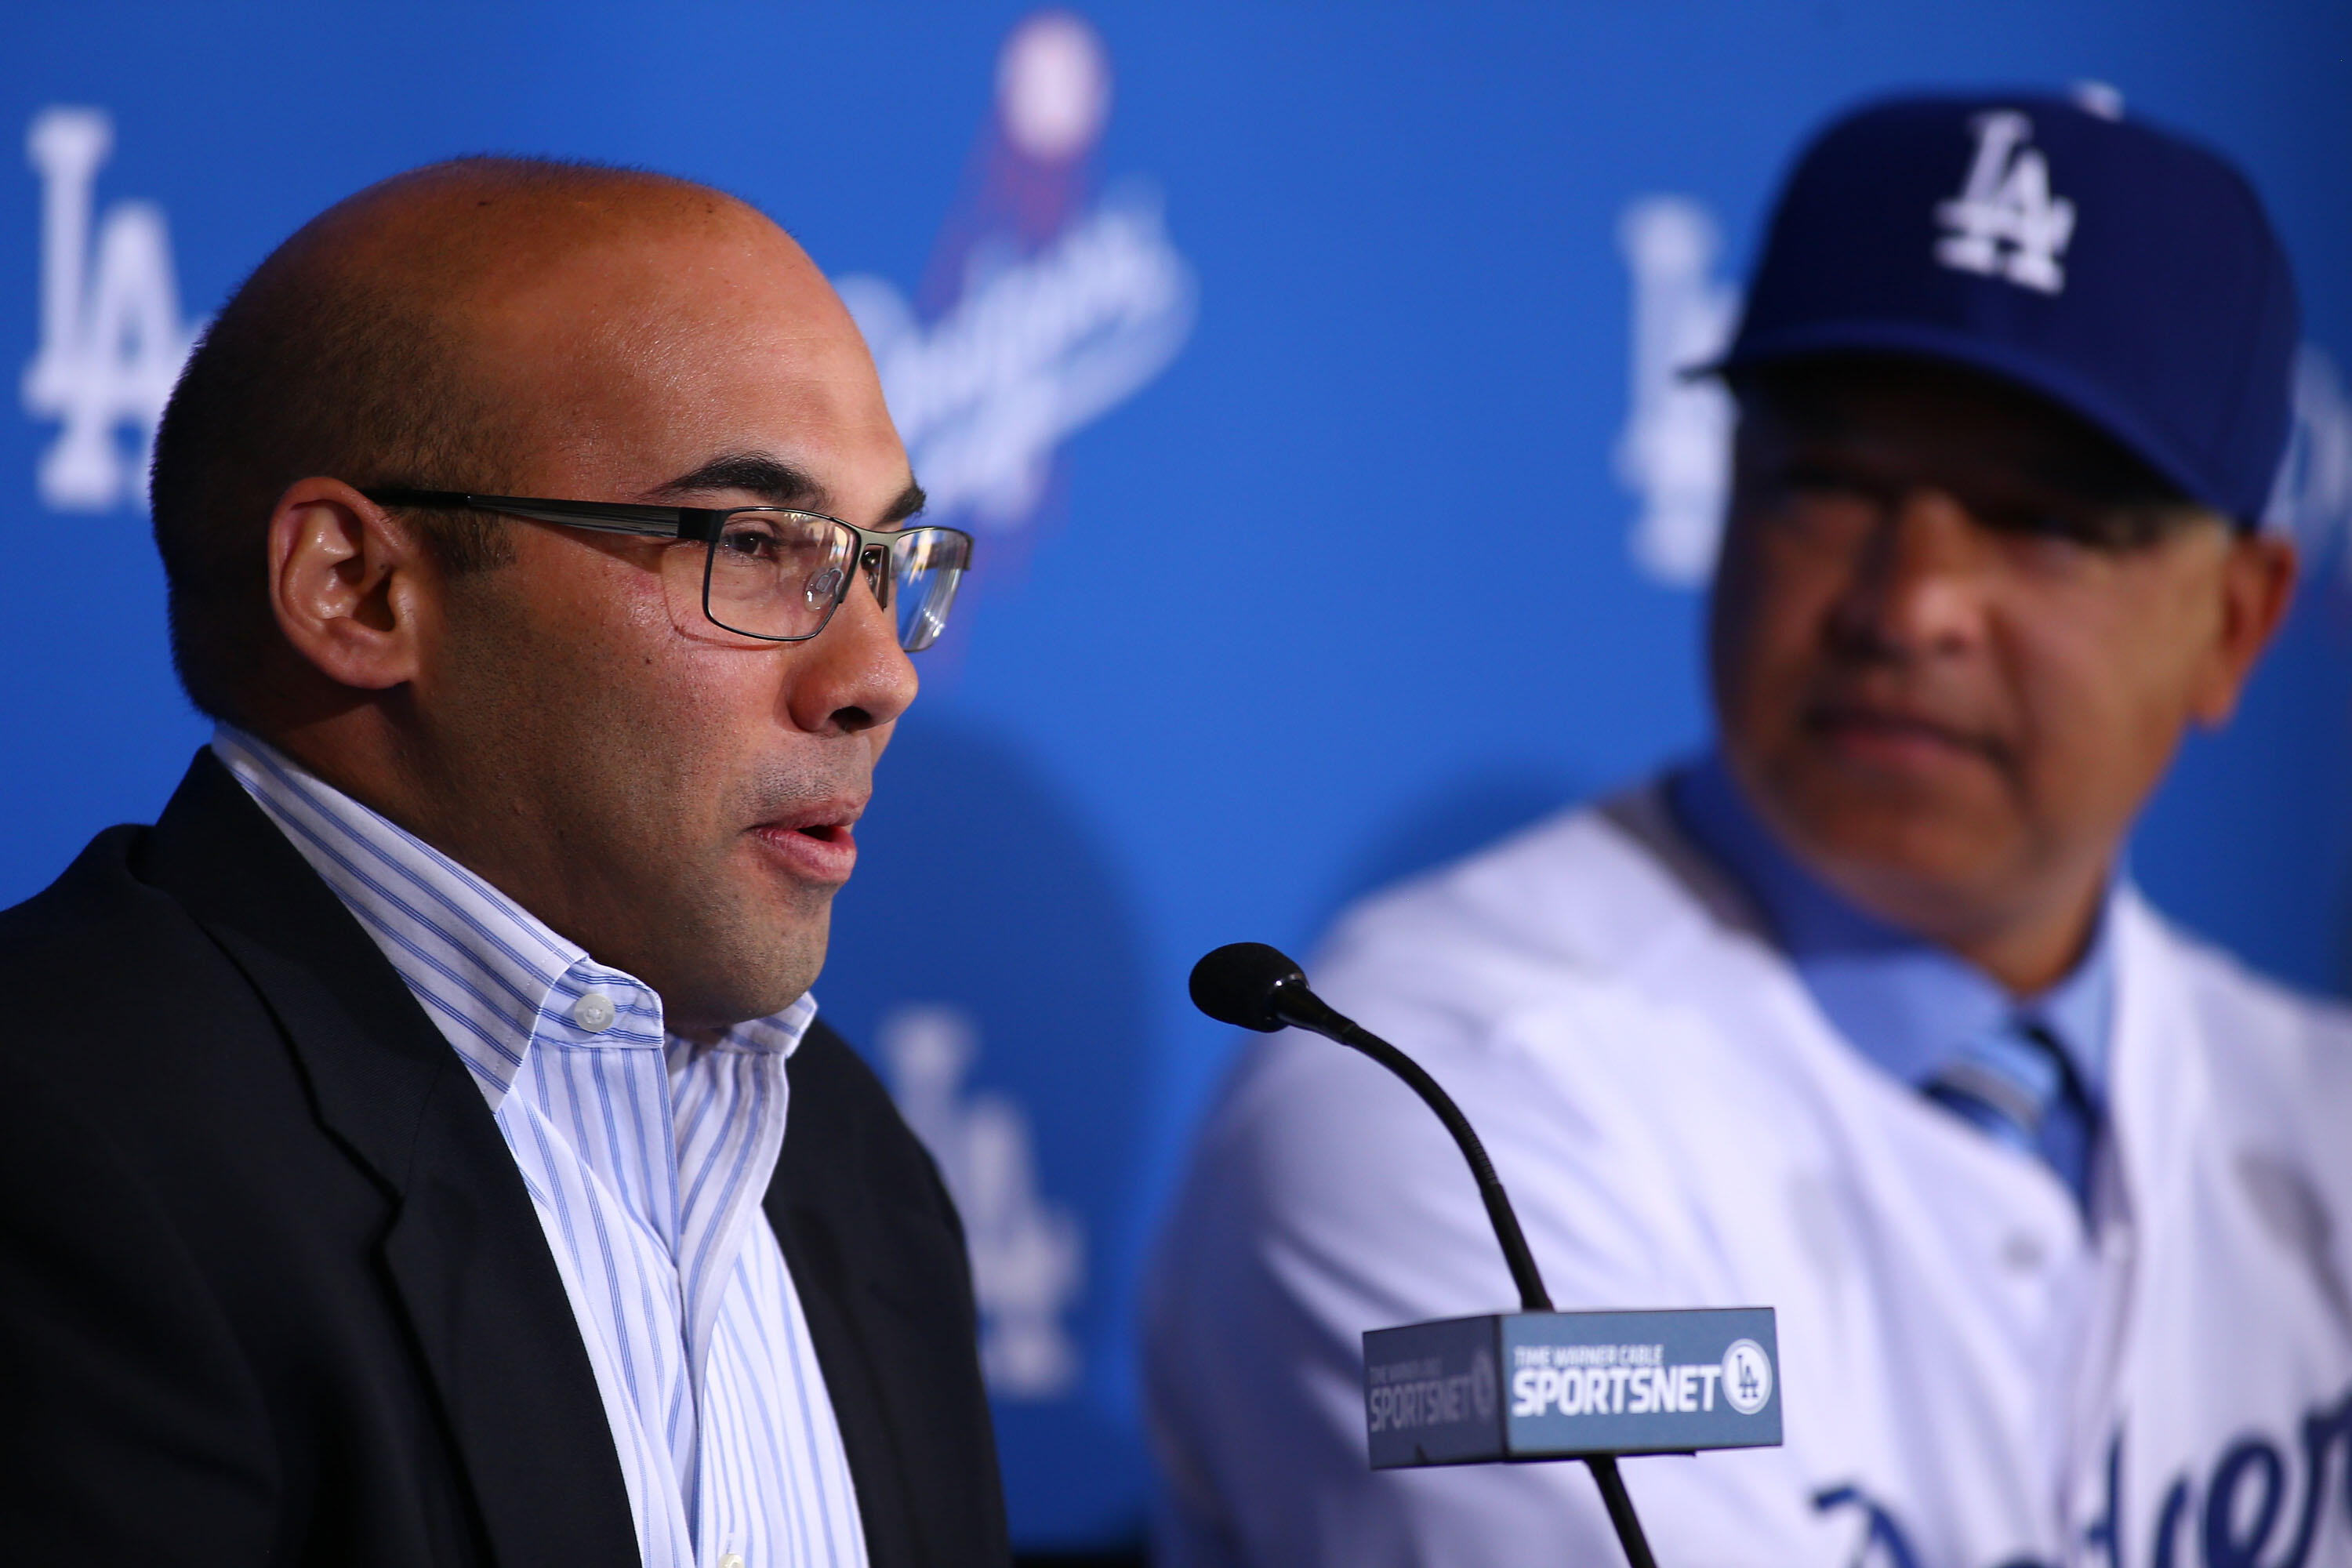 LOS ANGELES, CA - DECEMBER 01:  Farhan Zaidi, Los Angeles Dodgers general manager, left, speaks as Dave Roberts, right, looks on during a press conference to introduce Roberts as the new Los Angeles Dodgers manager at Dodger Stadium on December 1, 2015 in